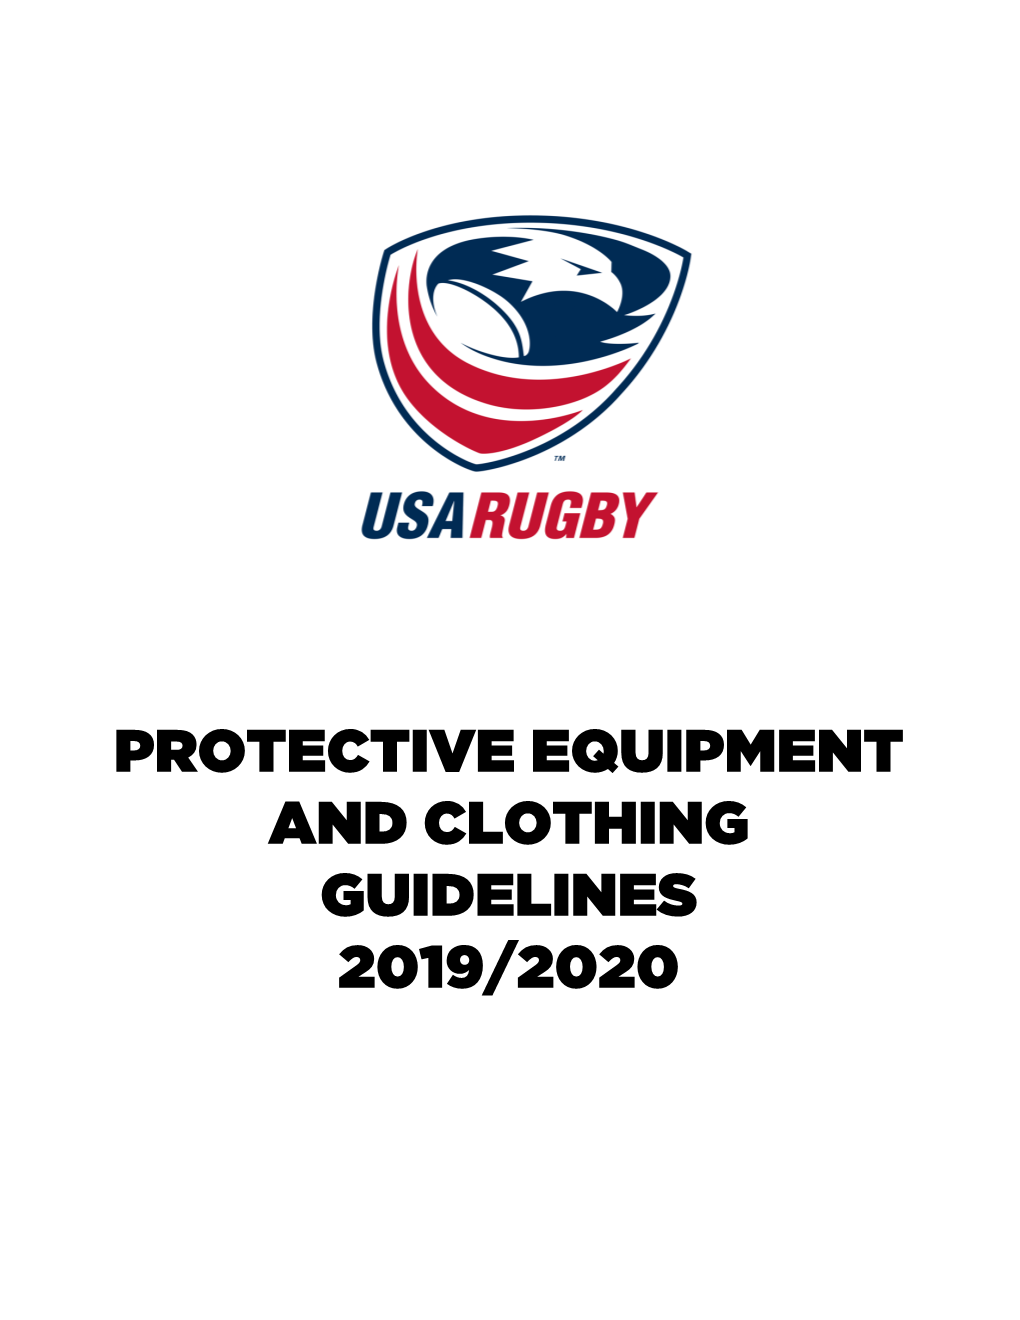 Protective Equipment and Clothing Guidelines 2019/2020